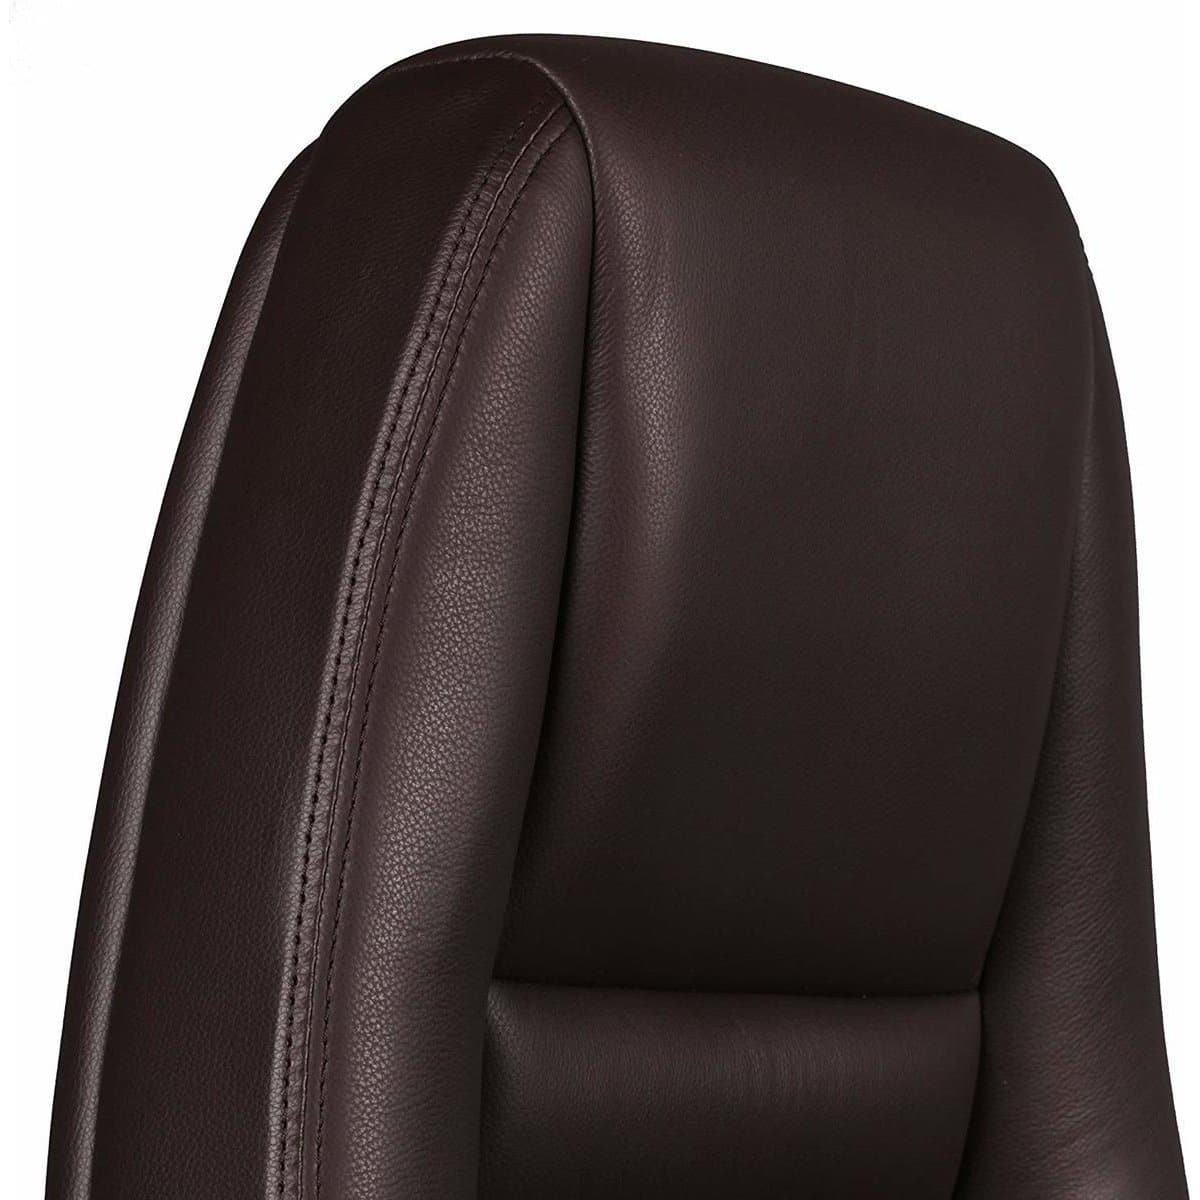 Nancy's Baychester Leather Office Chair Brown - Swivel office chair leather - Office chair leather - Executive chair leather